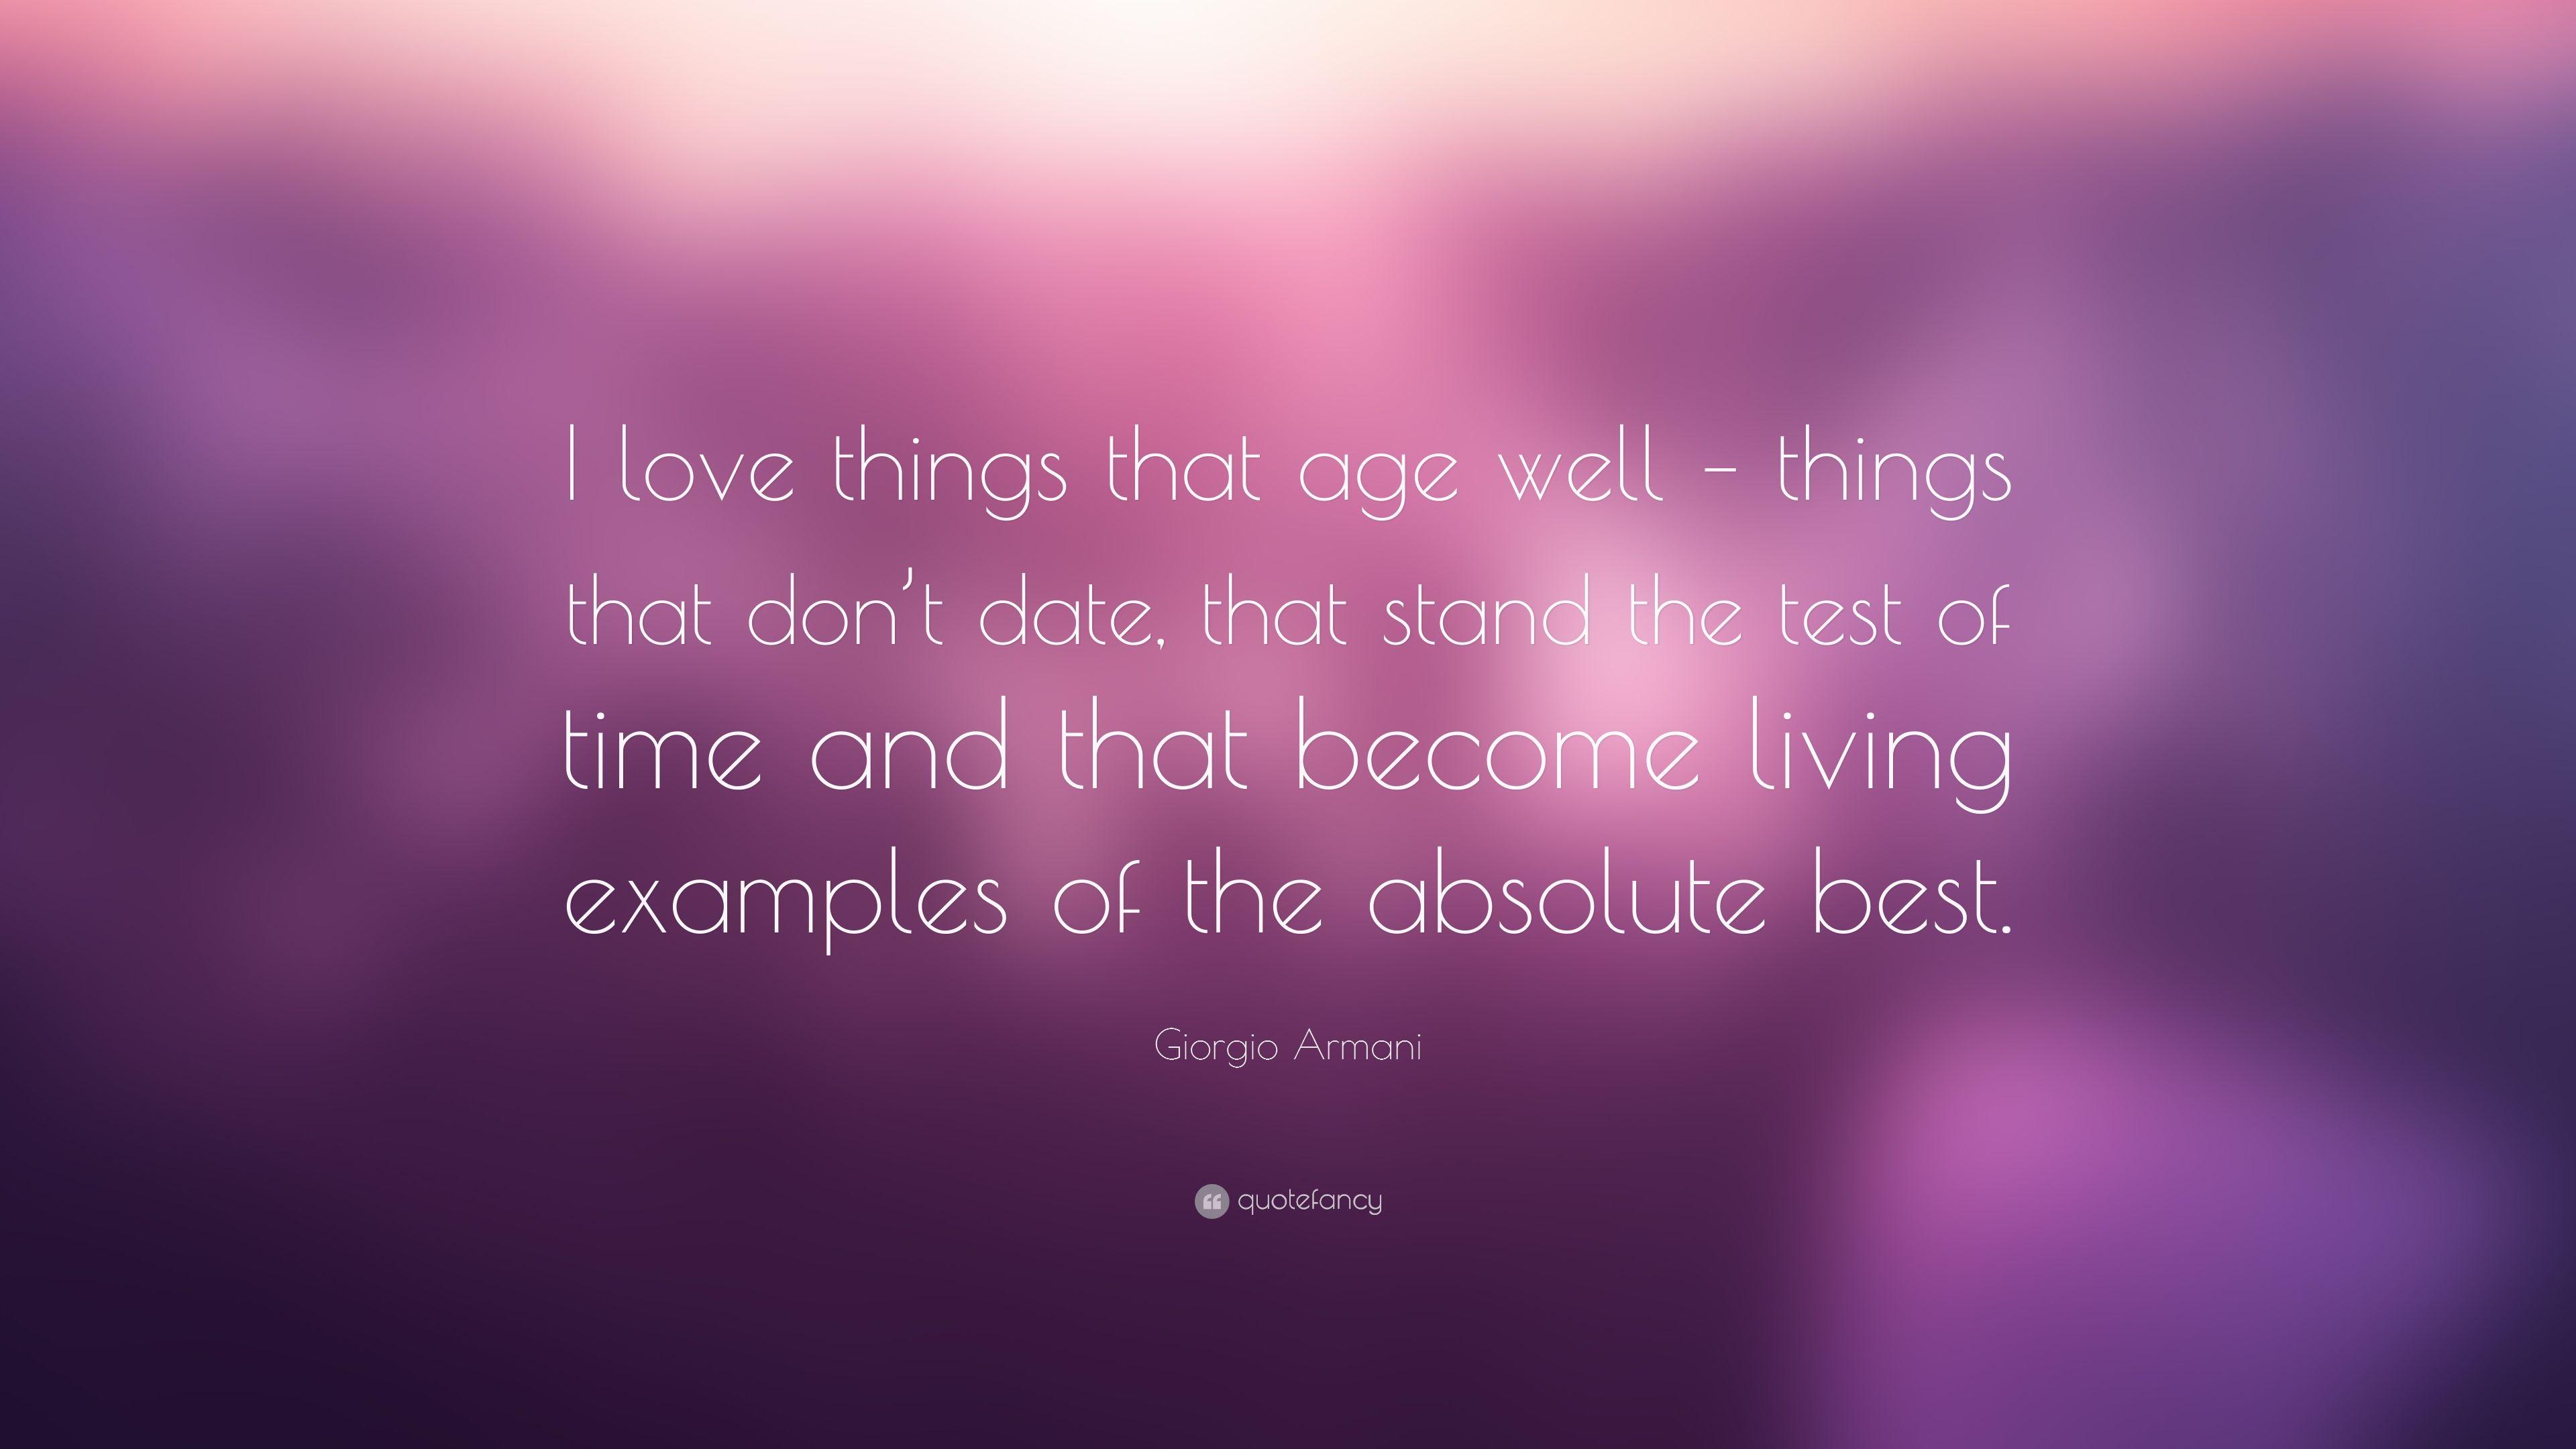 Giorgio Armani Quote: “I love things that age well